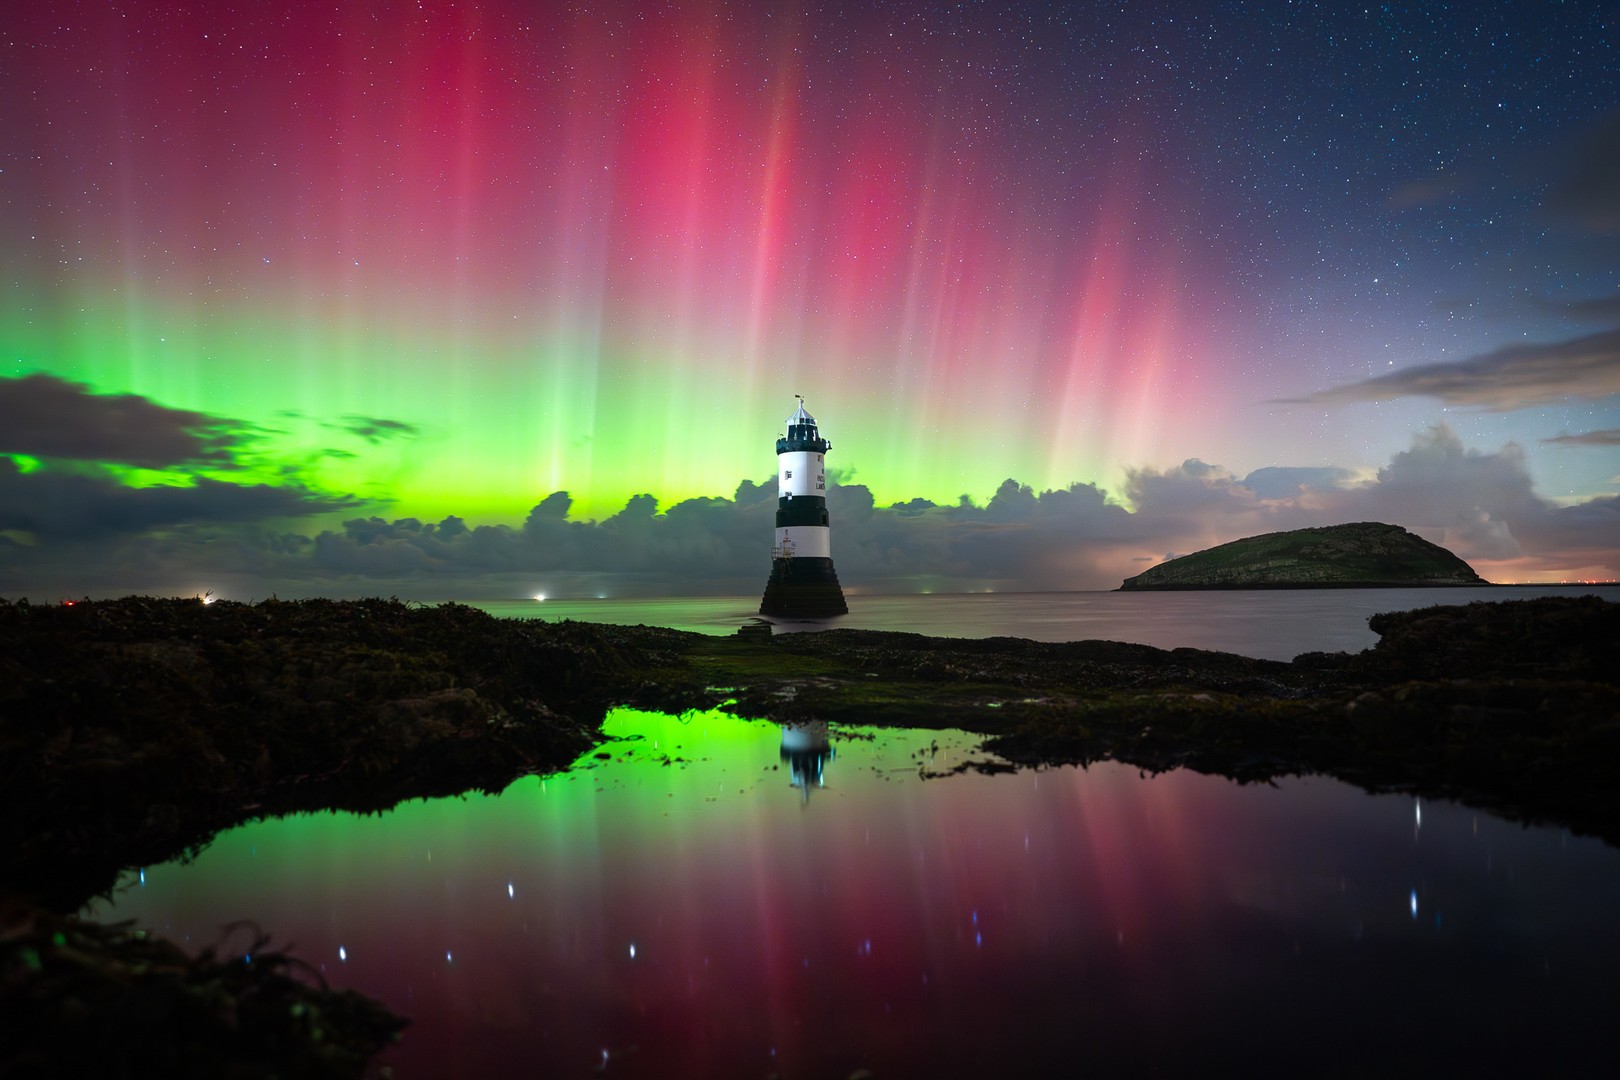 Bright Northern Lights shine in the night sky over a lighthouse